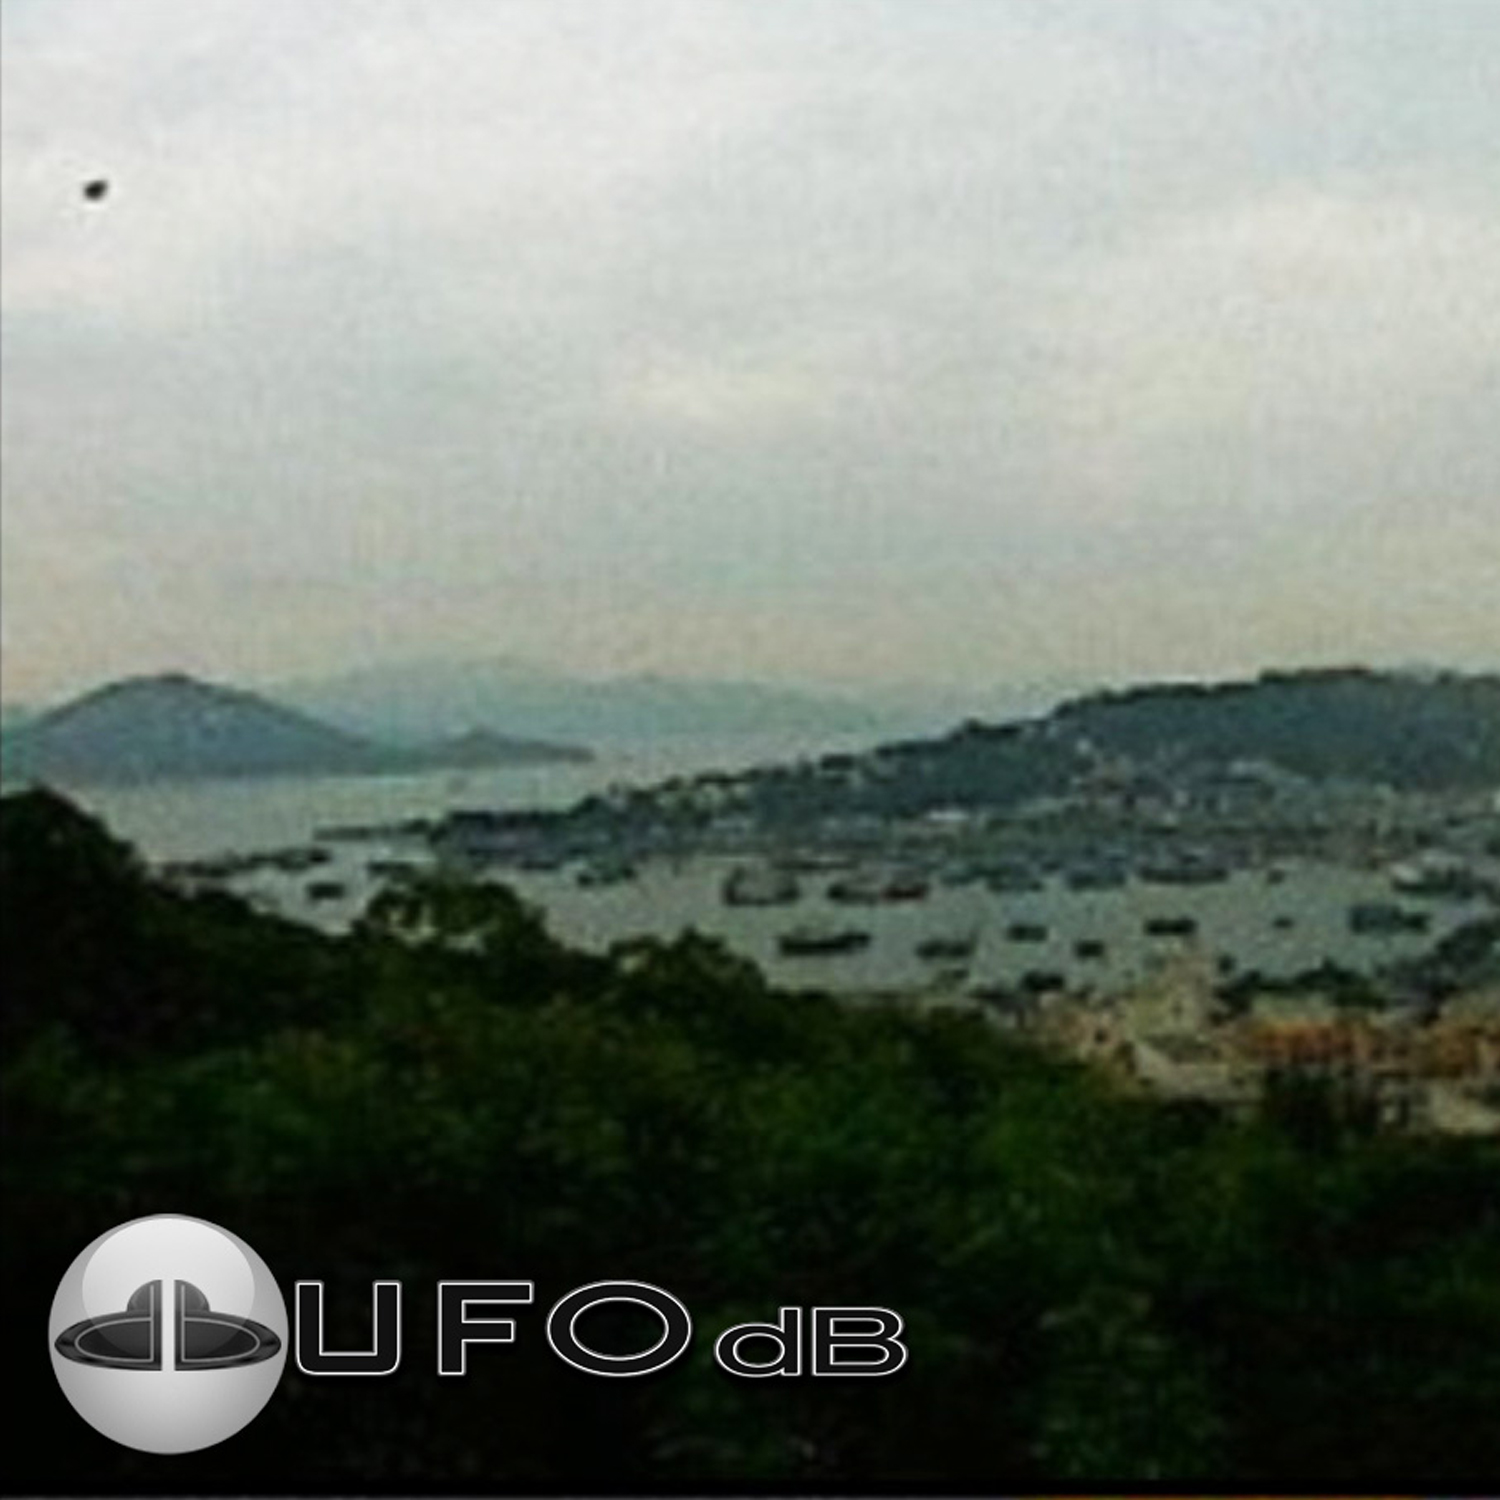 Web cam capture UFO picture over island of Cheung Chauen | Hong Kong UFO Picture #226-2